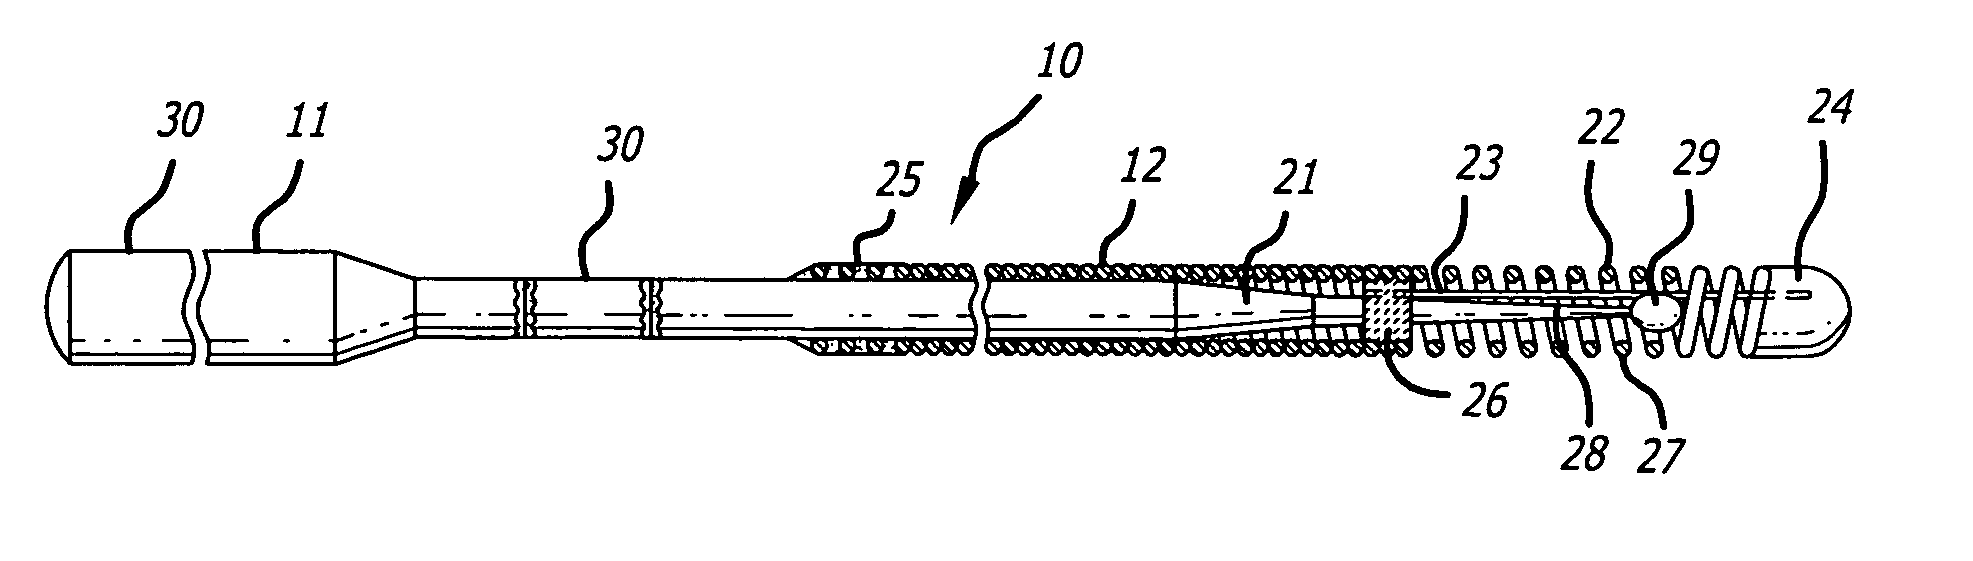 Apparatus and method for joining stainless steel guide wire portion to nitinol portion, without a hypotube